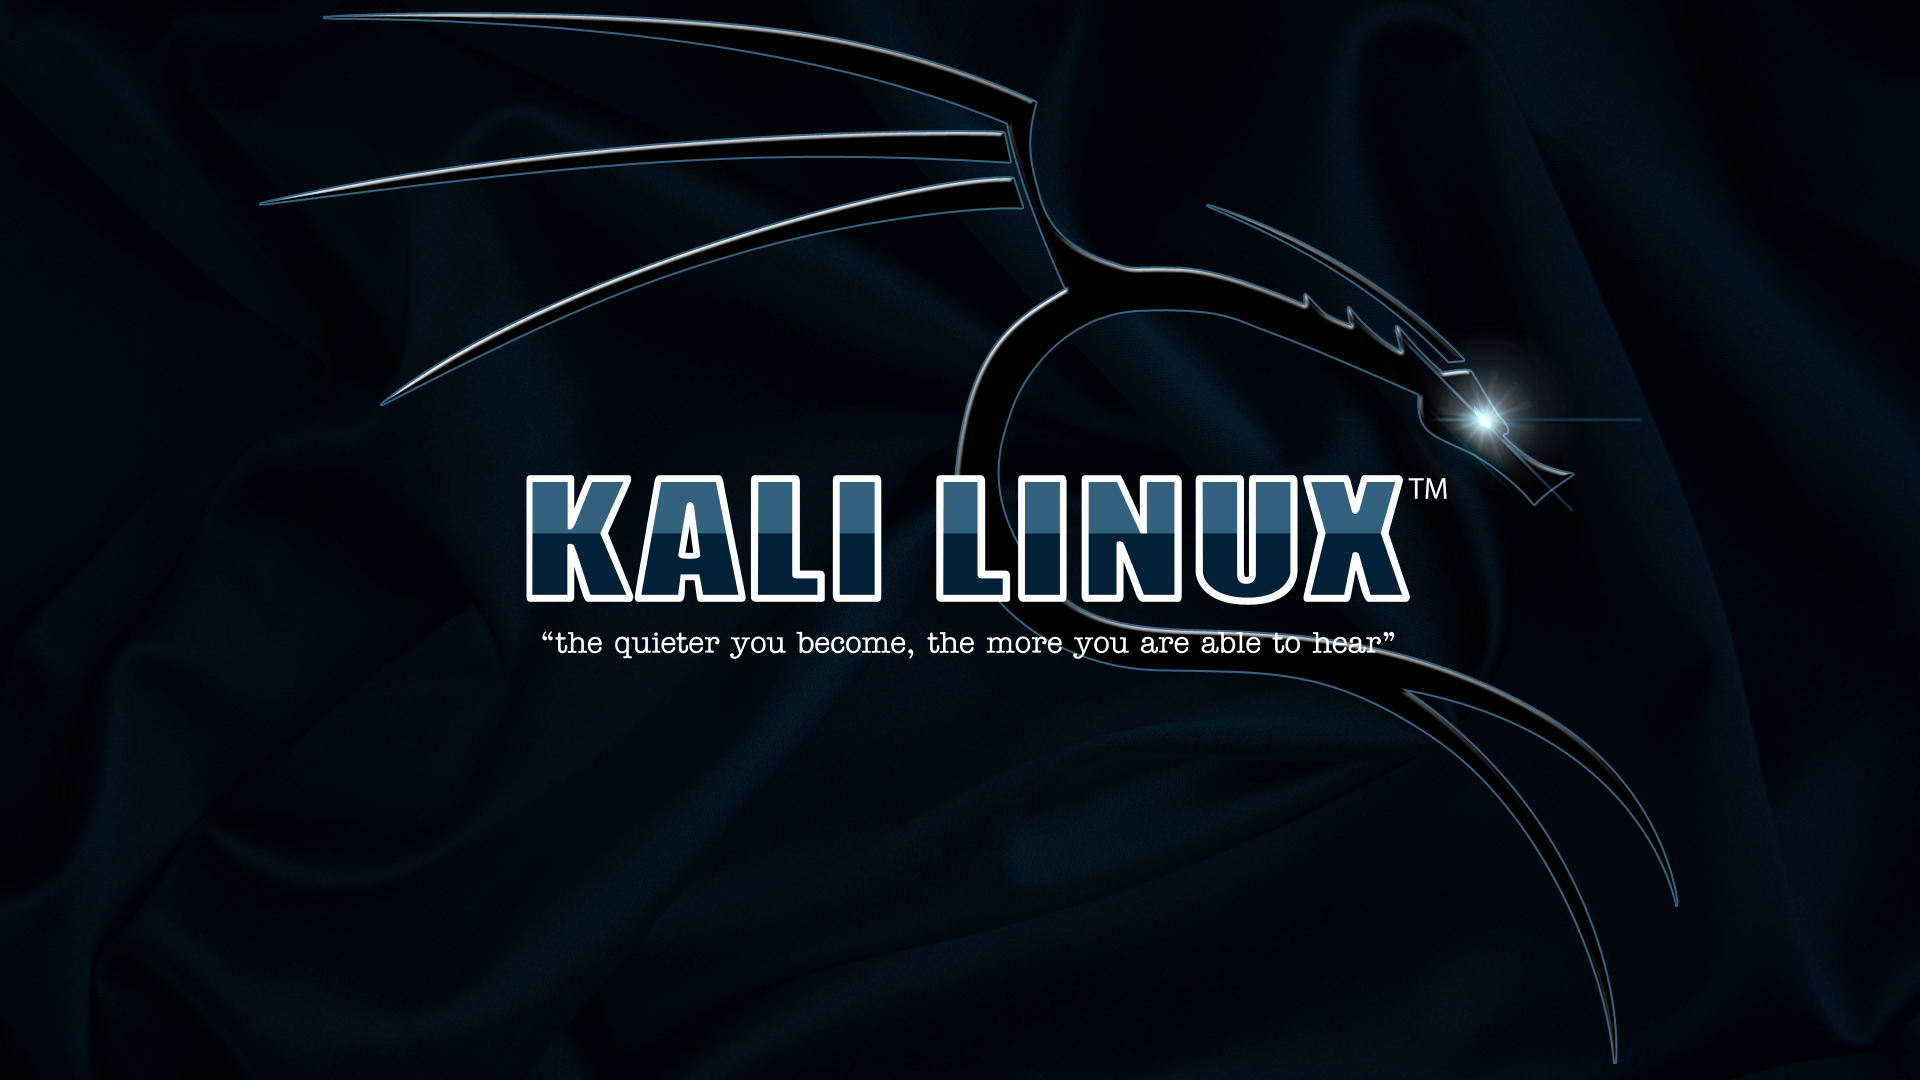 41 Amazing Linux Wallpaper Backgrounds In Hd